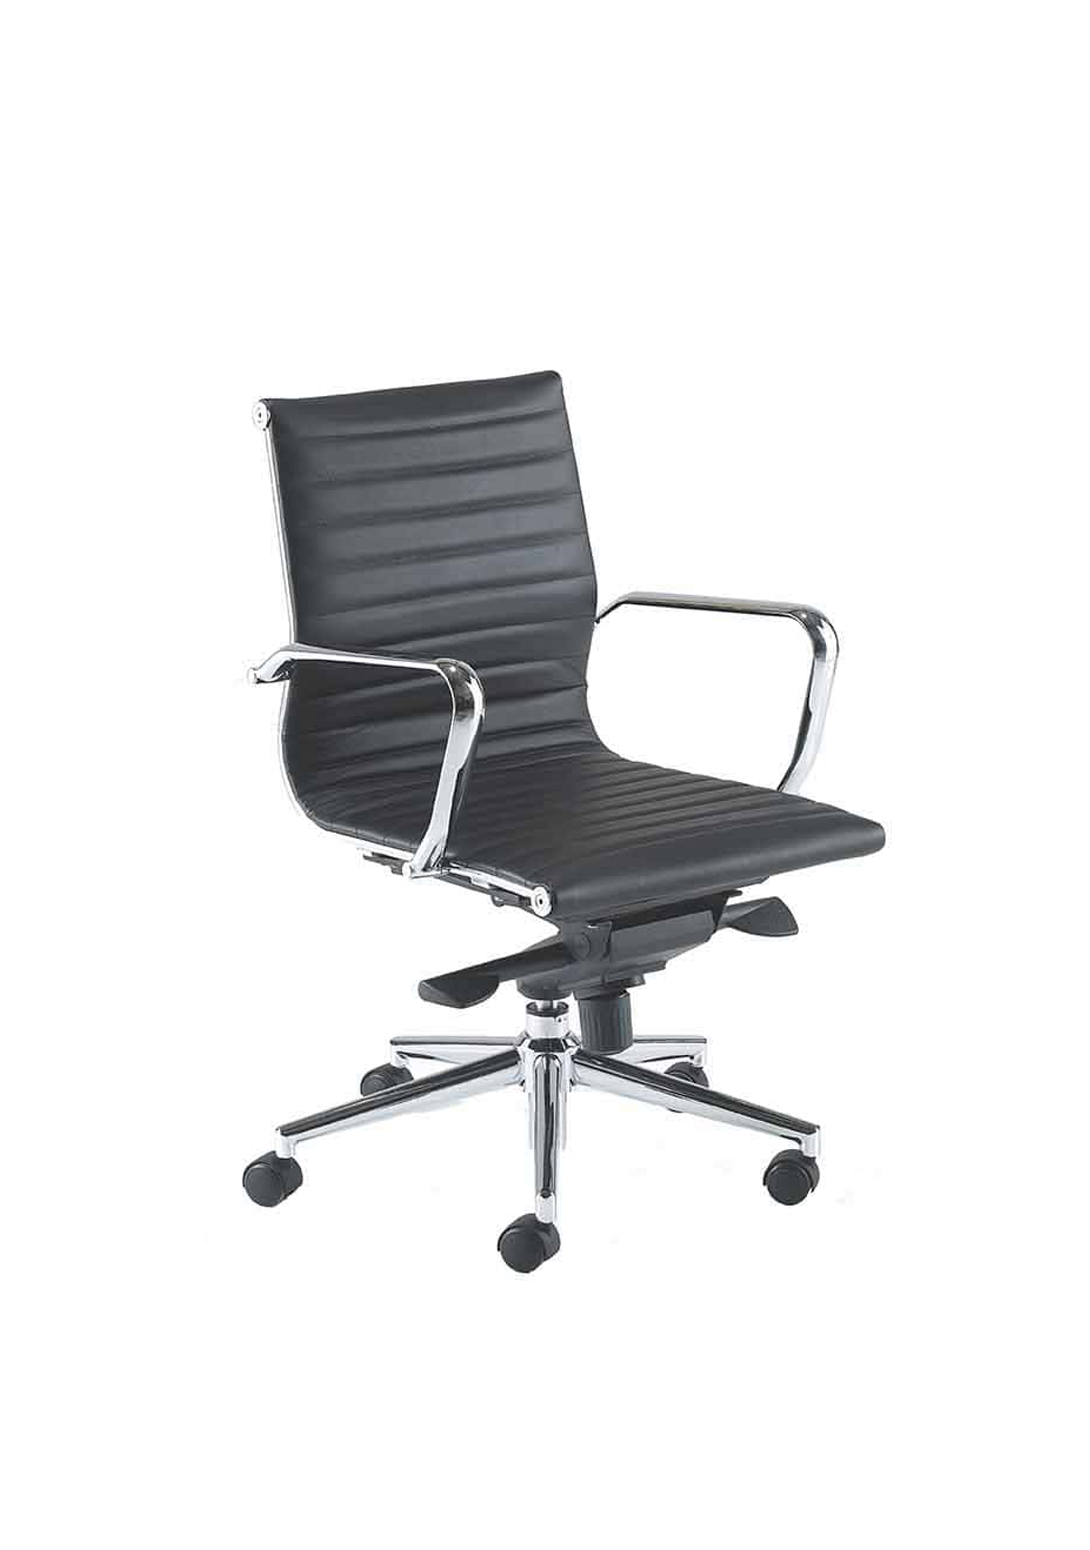 ARIA - AM2 Black Leather Operator Chair